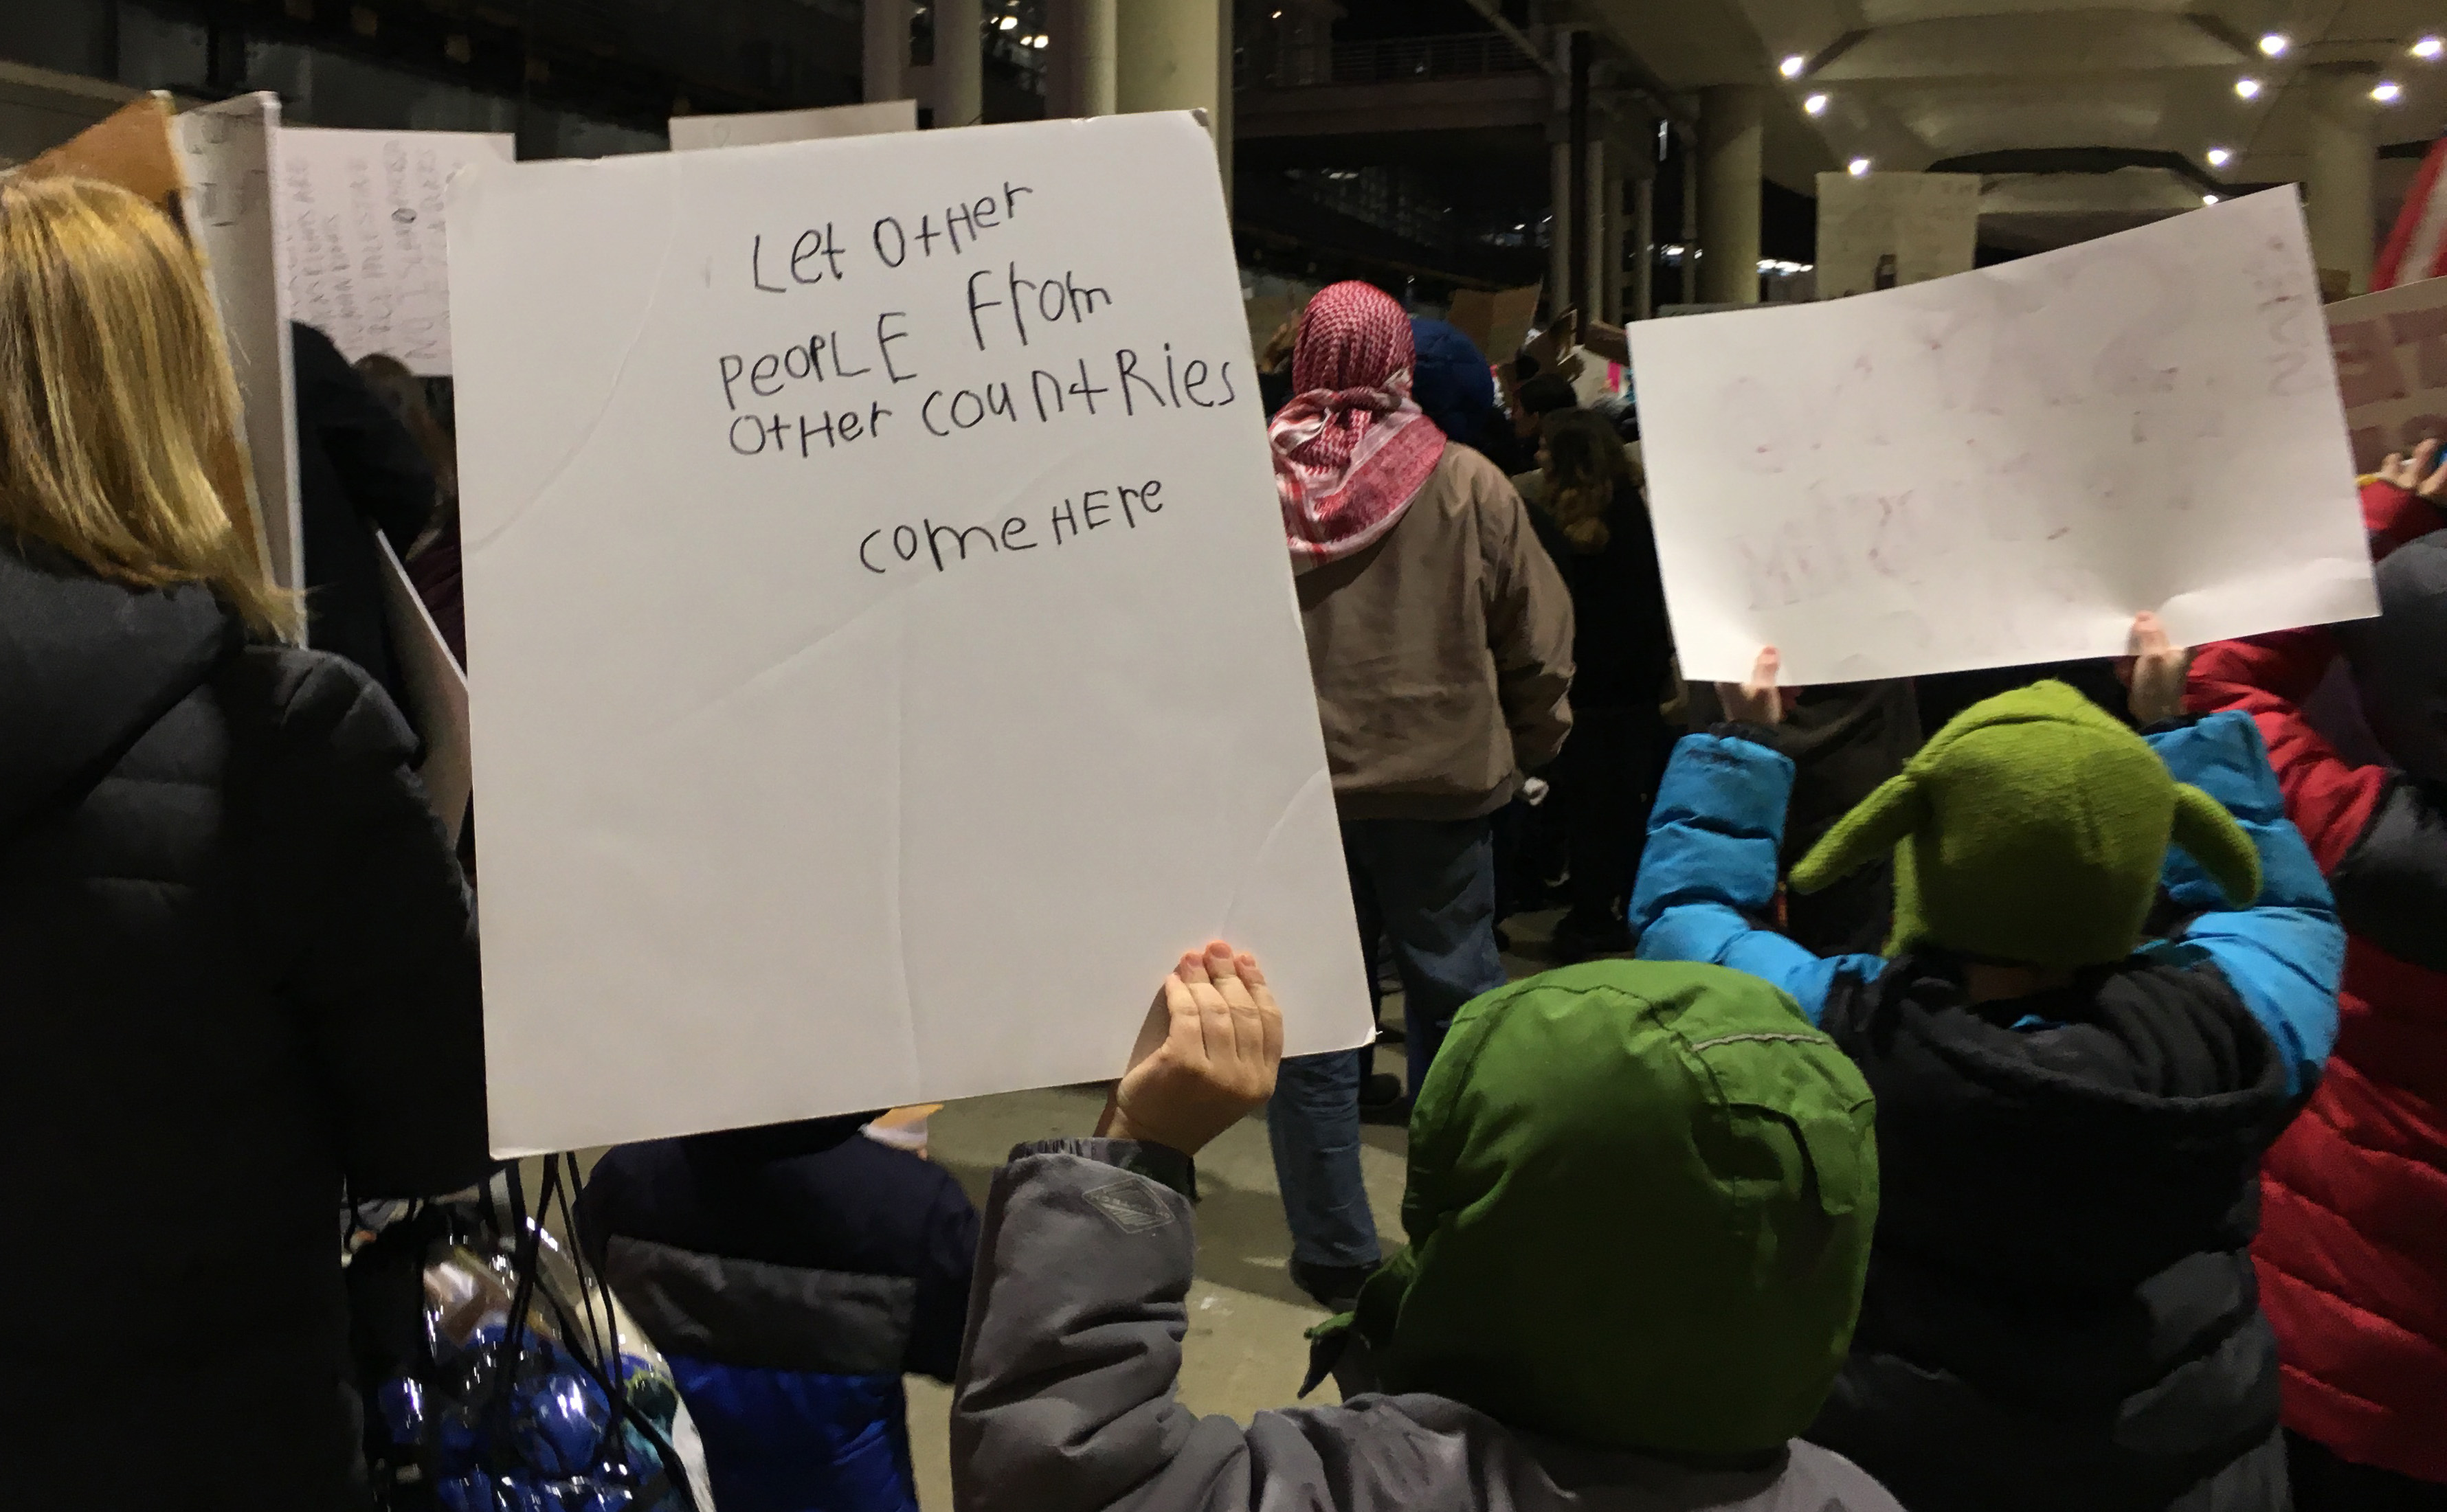 A plea by a youngster among thousands of protesters at Chicago O'Hare International Airport Sunday against President Donald Trump's new immigration policies. (Shen Lu/MEDILL)